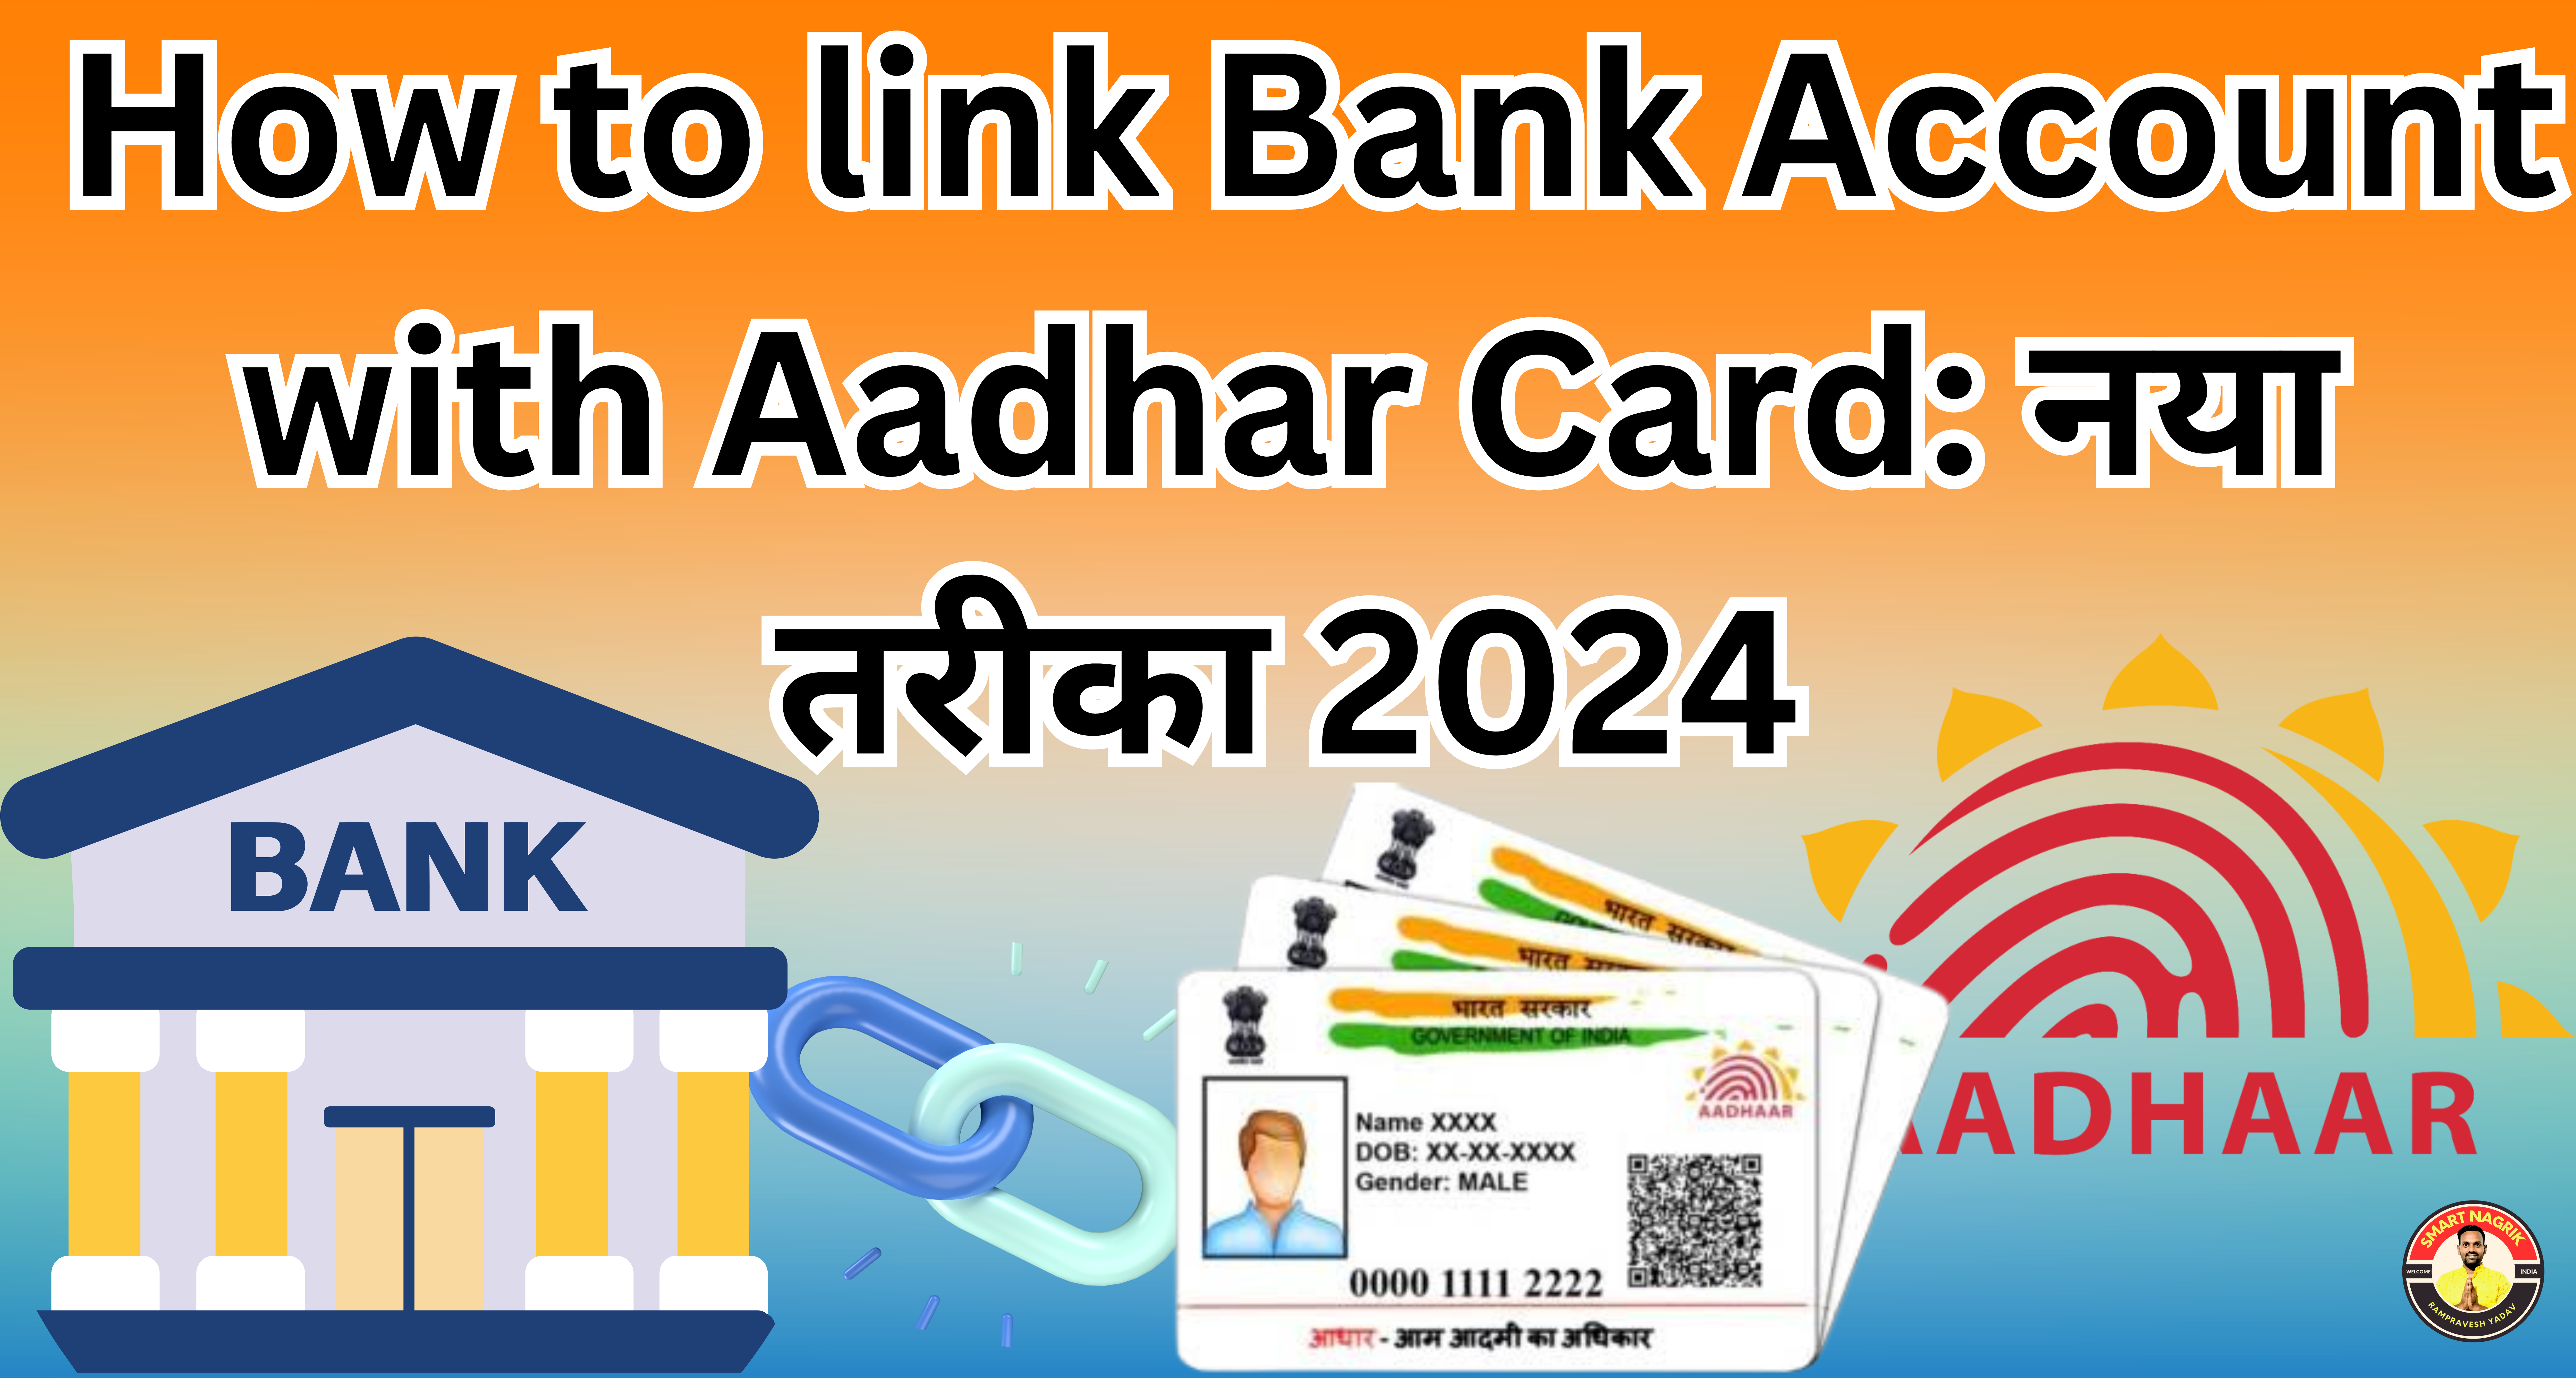 How to link Bank Account with Aadhar Card: नया तरीका 2024